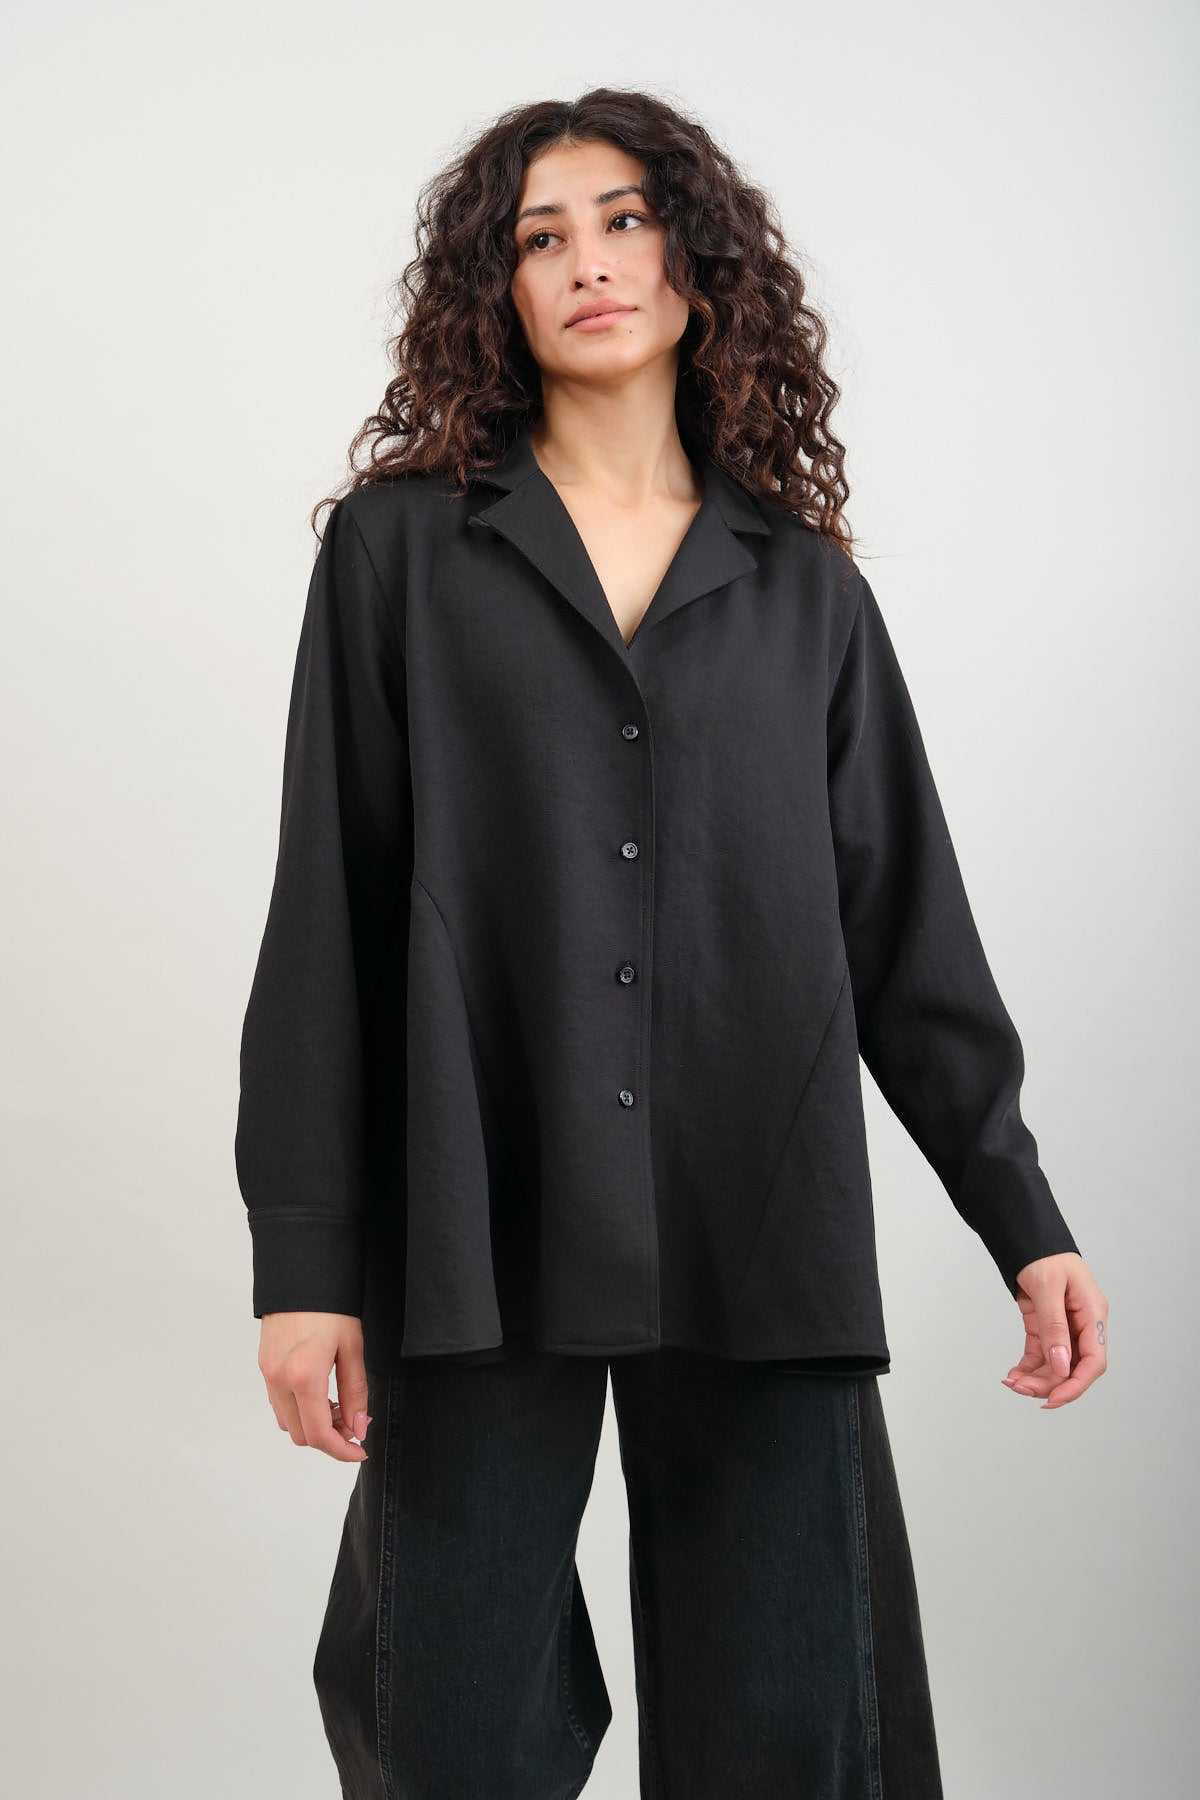 Loose fitted Rachel Comey Samora Top in Black